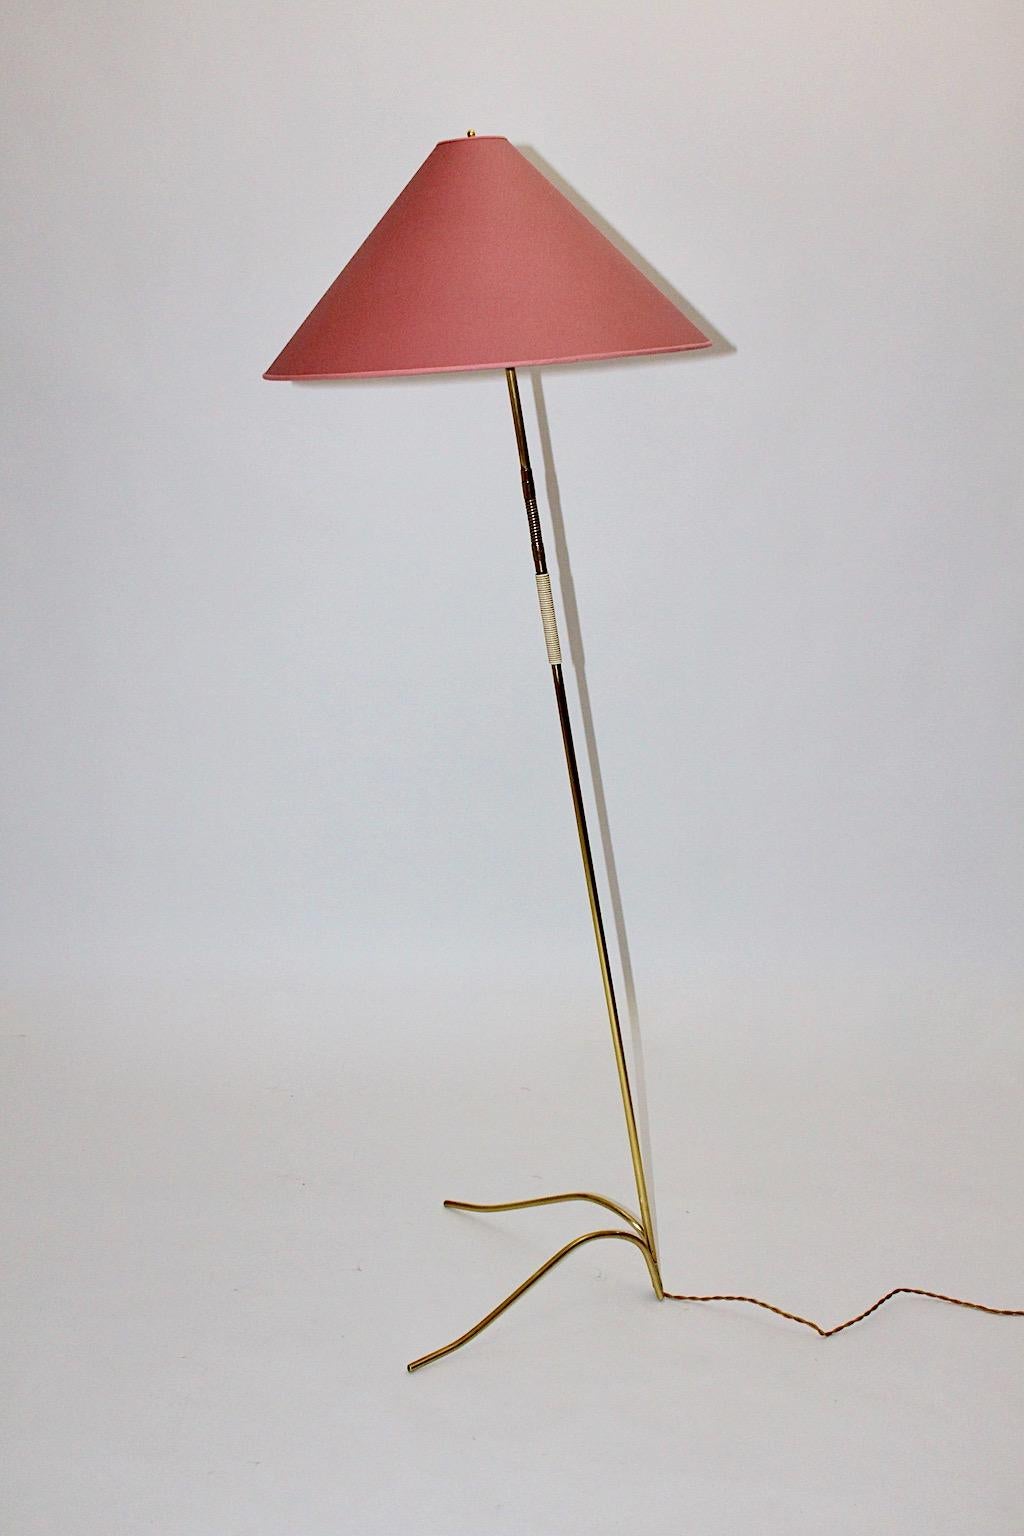 Brass vintage Mid-Century Modern floor lamp designed and manufactured by Rupert Nikoll, 1950, Austria.
This stunning floor lamp was made of polished brass tube with a plastic string handle and a renewed lamp shade, which shows a pastel tone in pink.